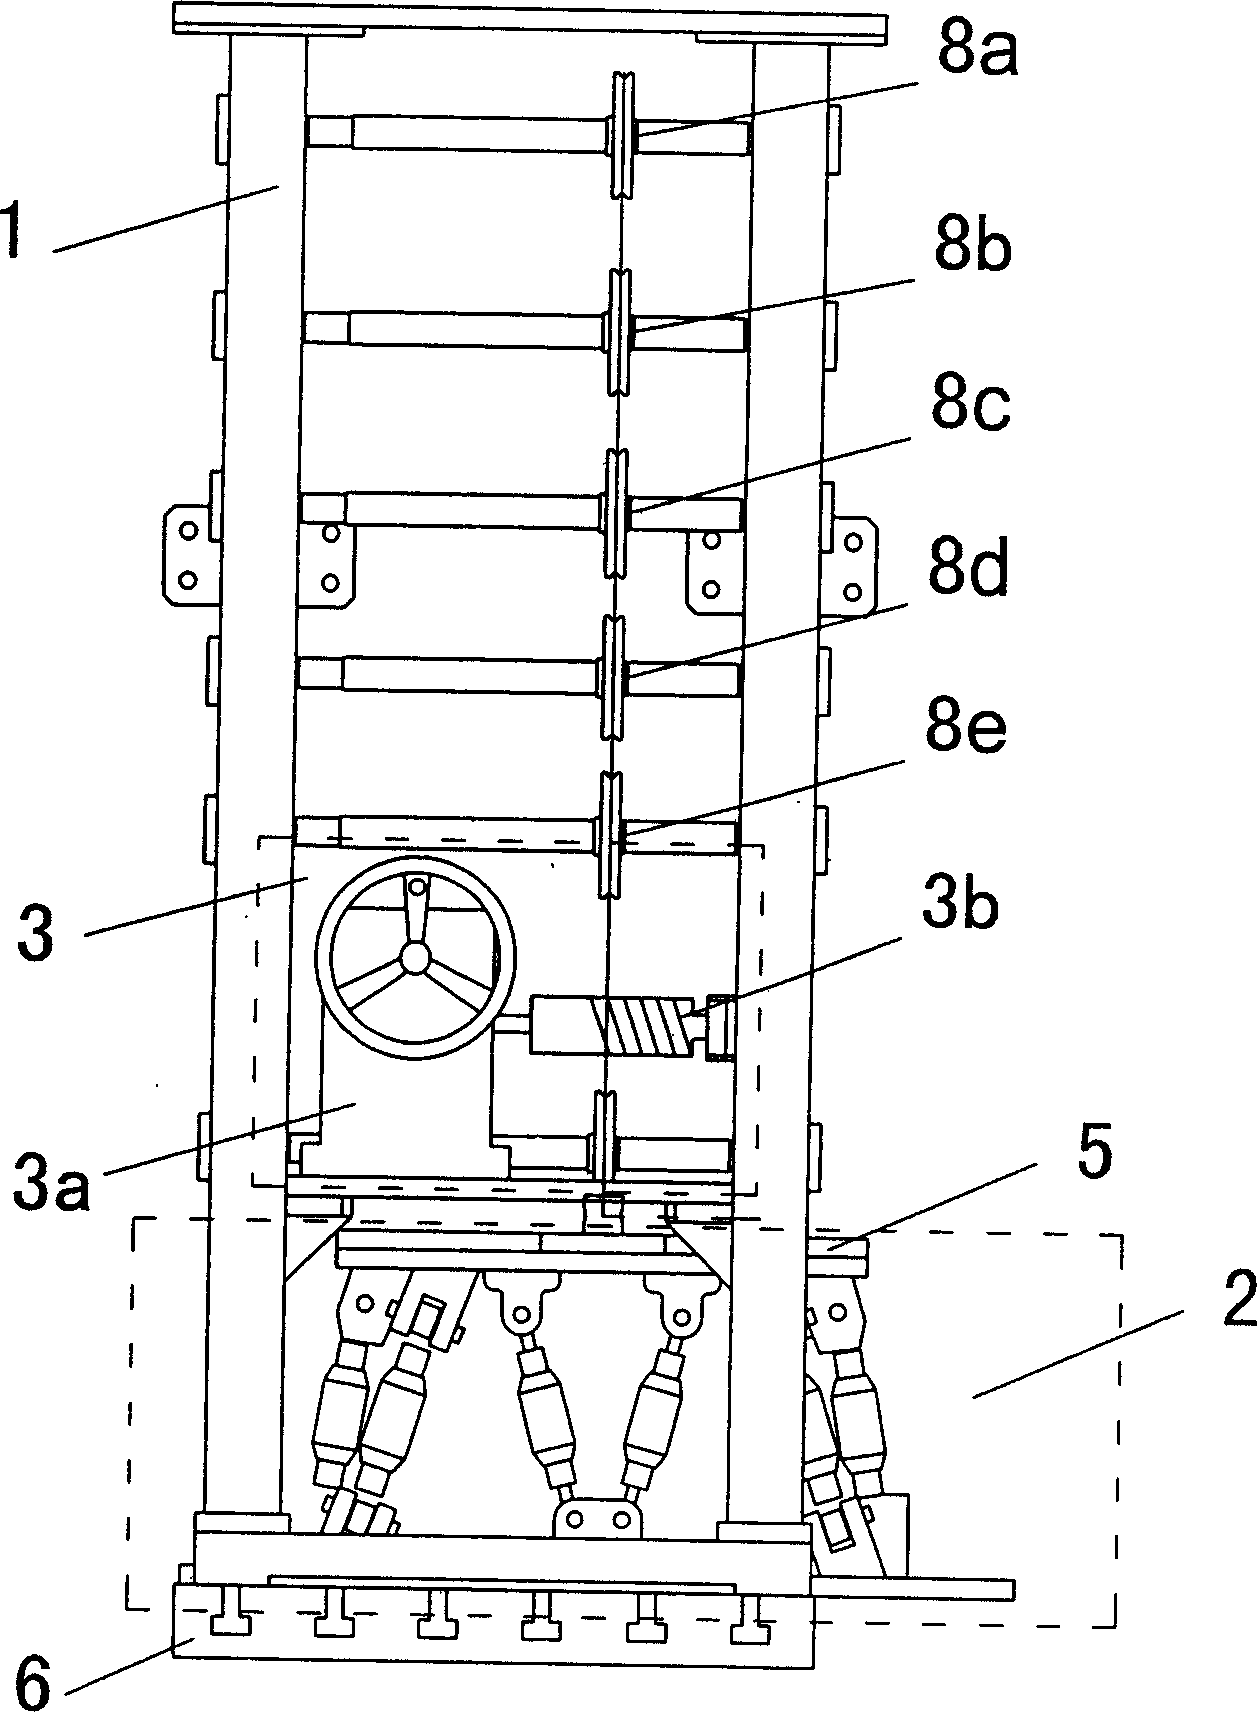 Device for calibrating parallel force transducer in six dimensions